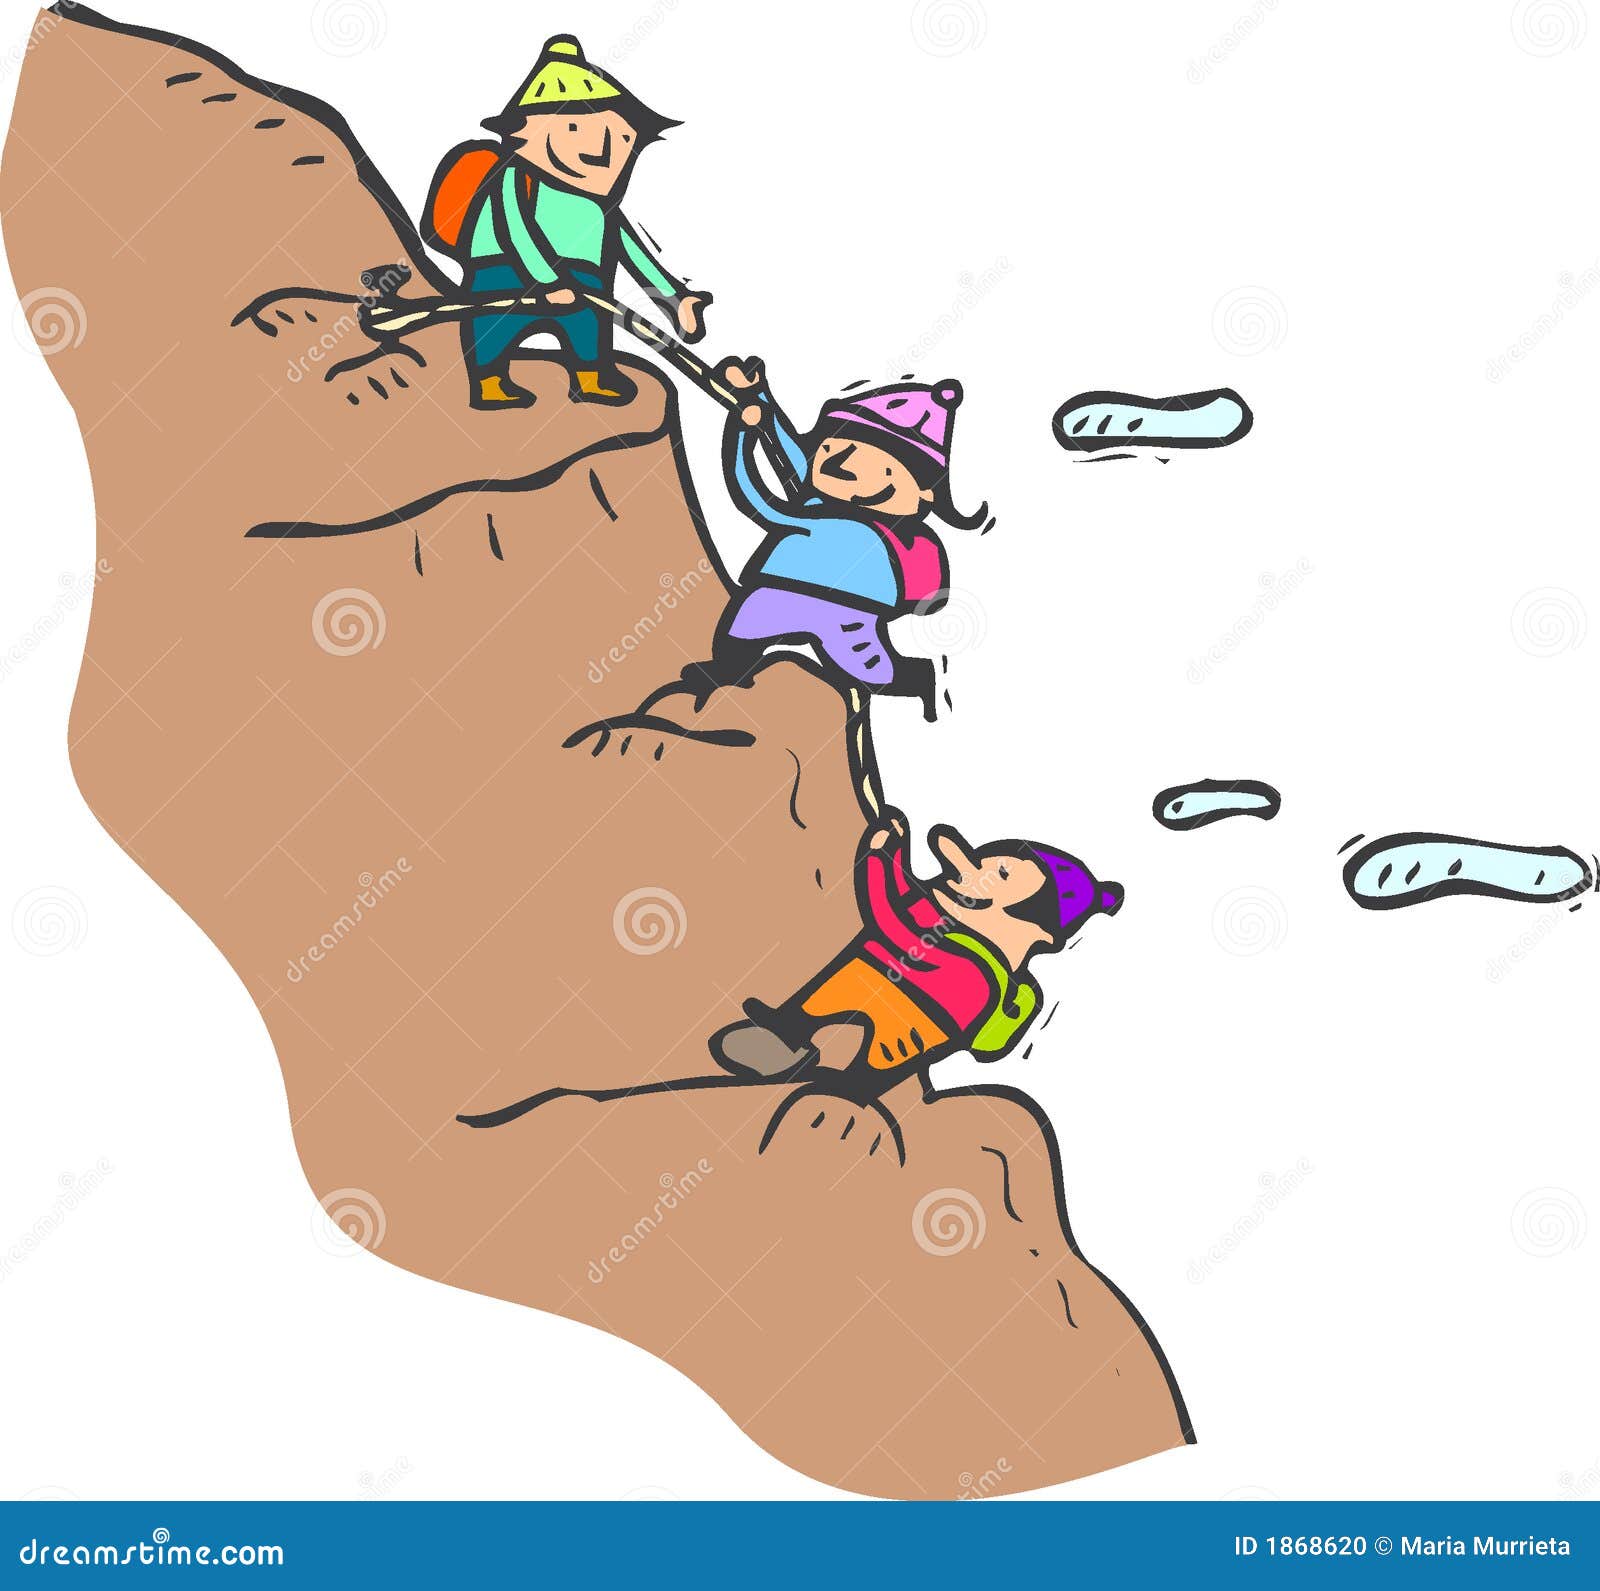 People climbing a mountain, they help each other as good team.